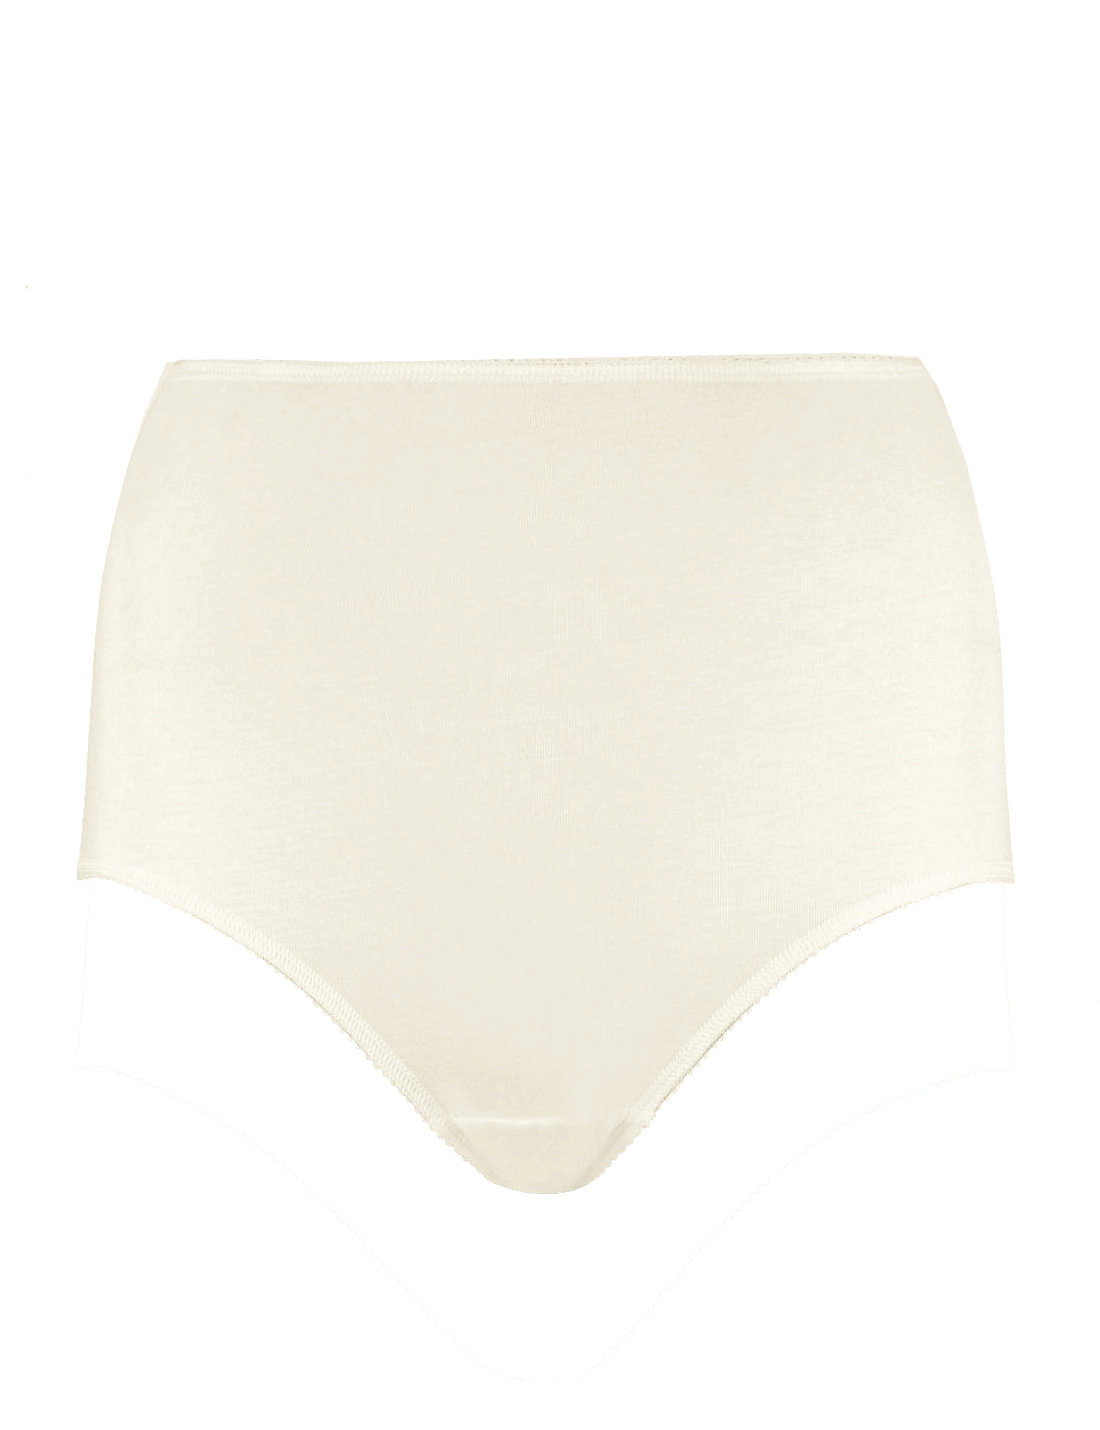 Marks and Spencer - - M&5 CREAM 5-Pack Cotton Rich Full Briefs - Size ...